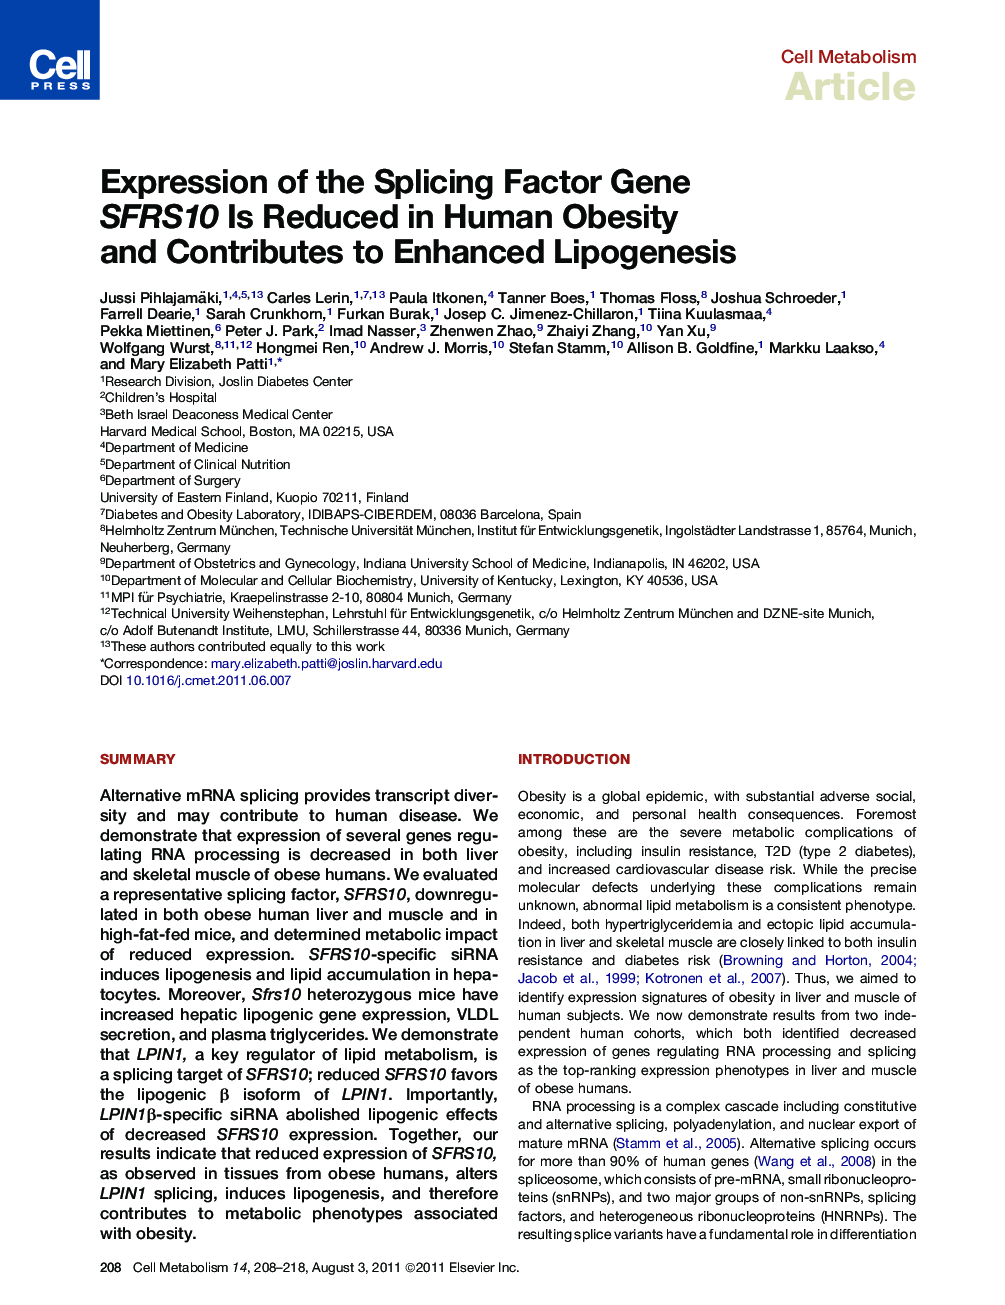 Expression of the Splicing Factor Gene SFRS10 Is Reduced in Human Obesity and Contributes to Enhanced Lipogenesis